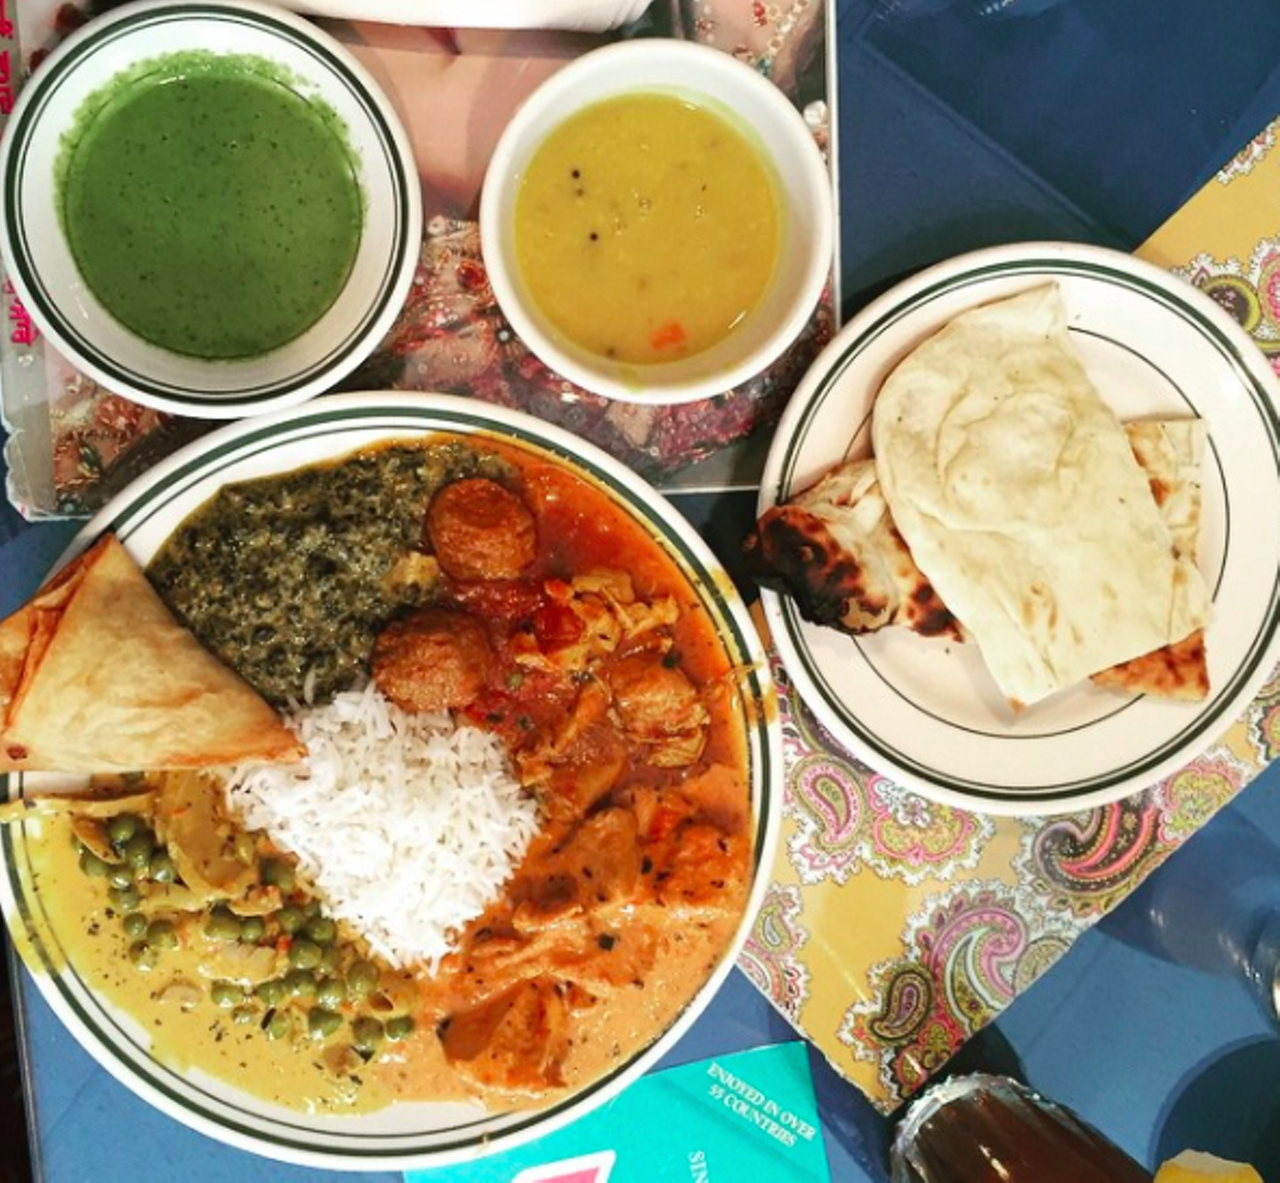 India Palace
8474 Fredericksburg Road, (210) 692-5262, indiapalacesatx.com
Go for the chicken saagwala and a bowl of tomato coconut soup. Just make sure to leave room for mango malwa (ice cream) for dessert.
Photo via Instagram, jtbrannigram